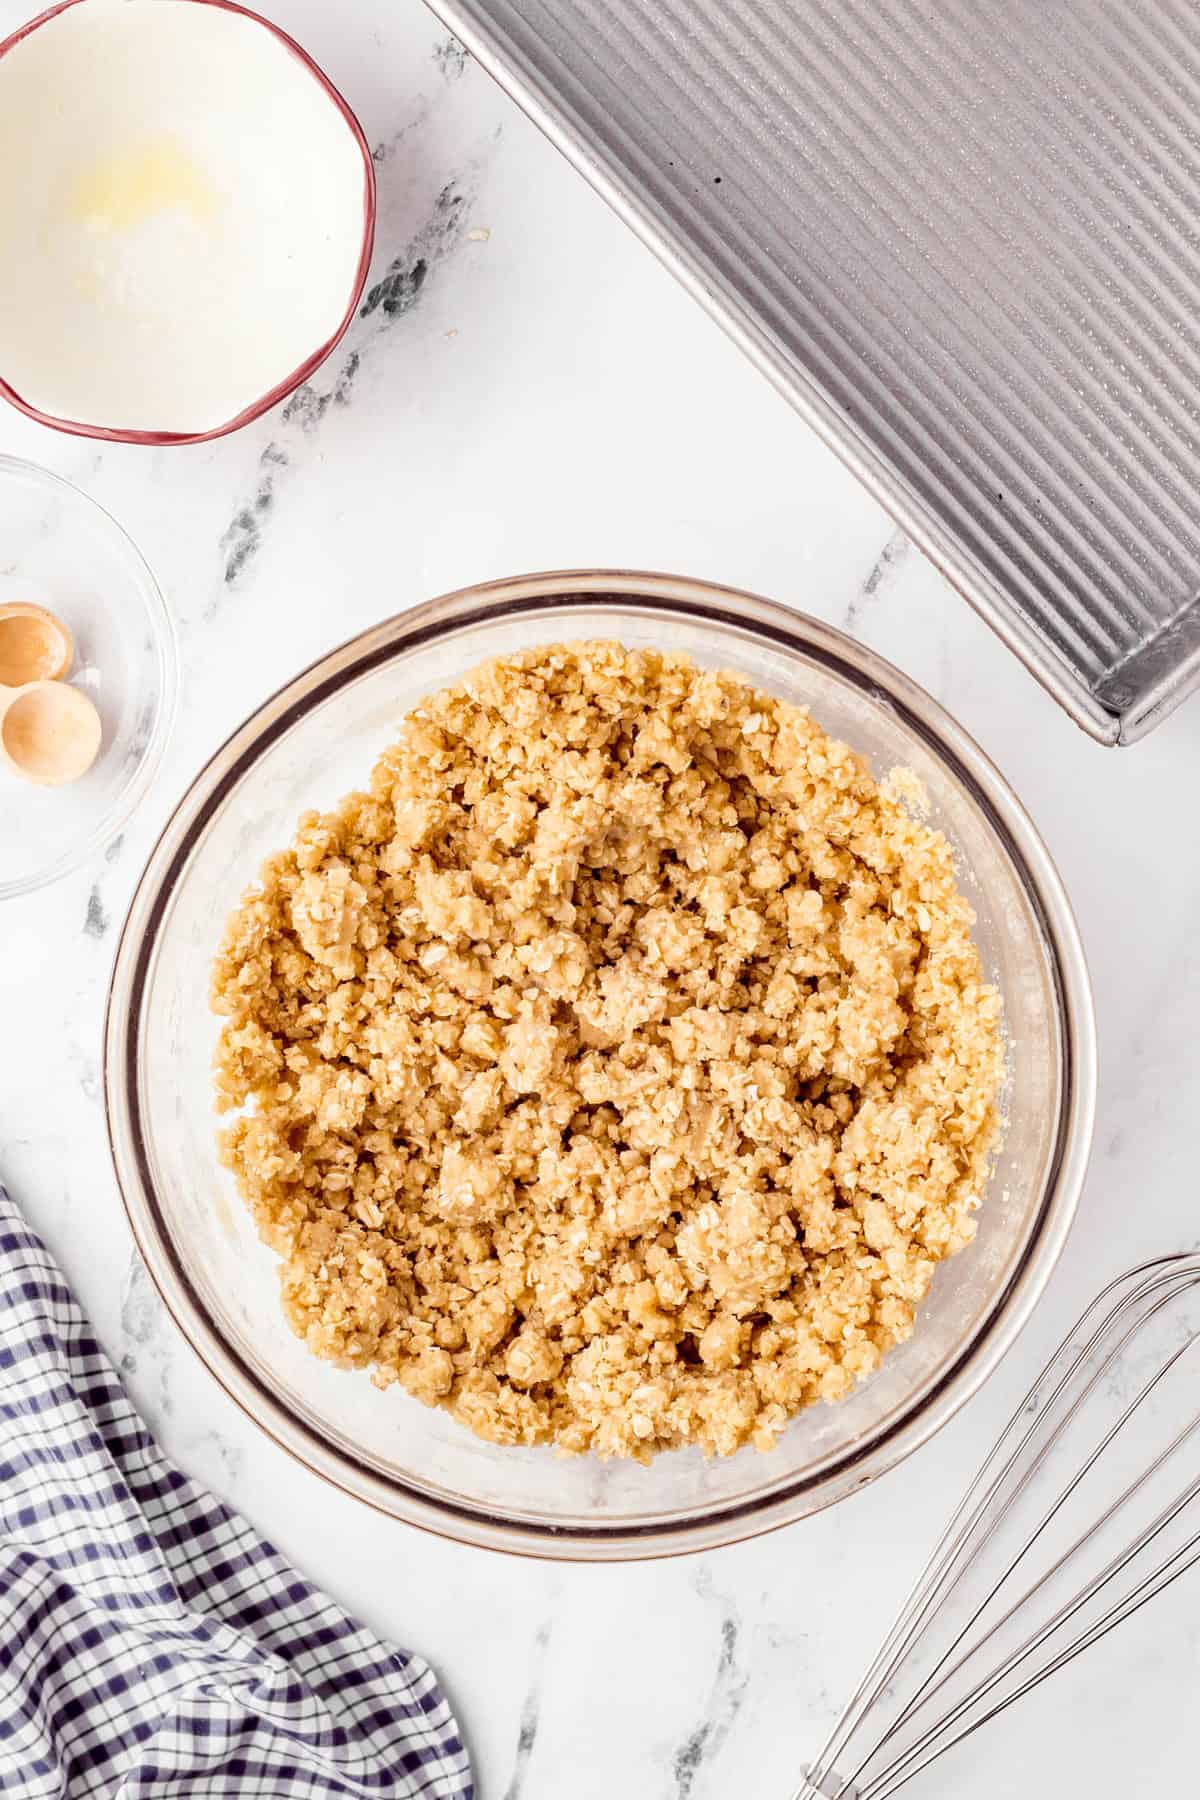 Combined ingredients in bowl for Caramel Oatmeal Bars crust